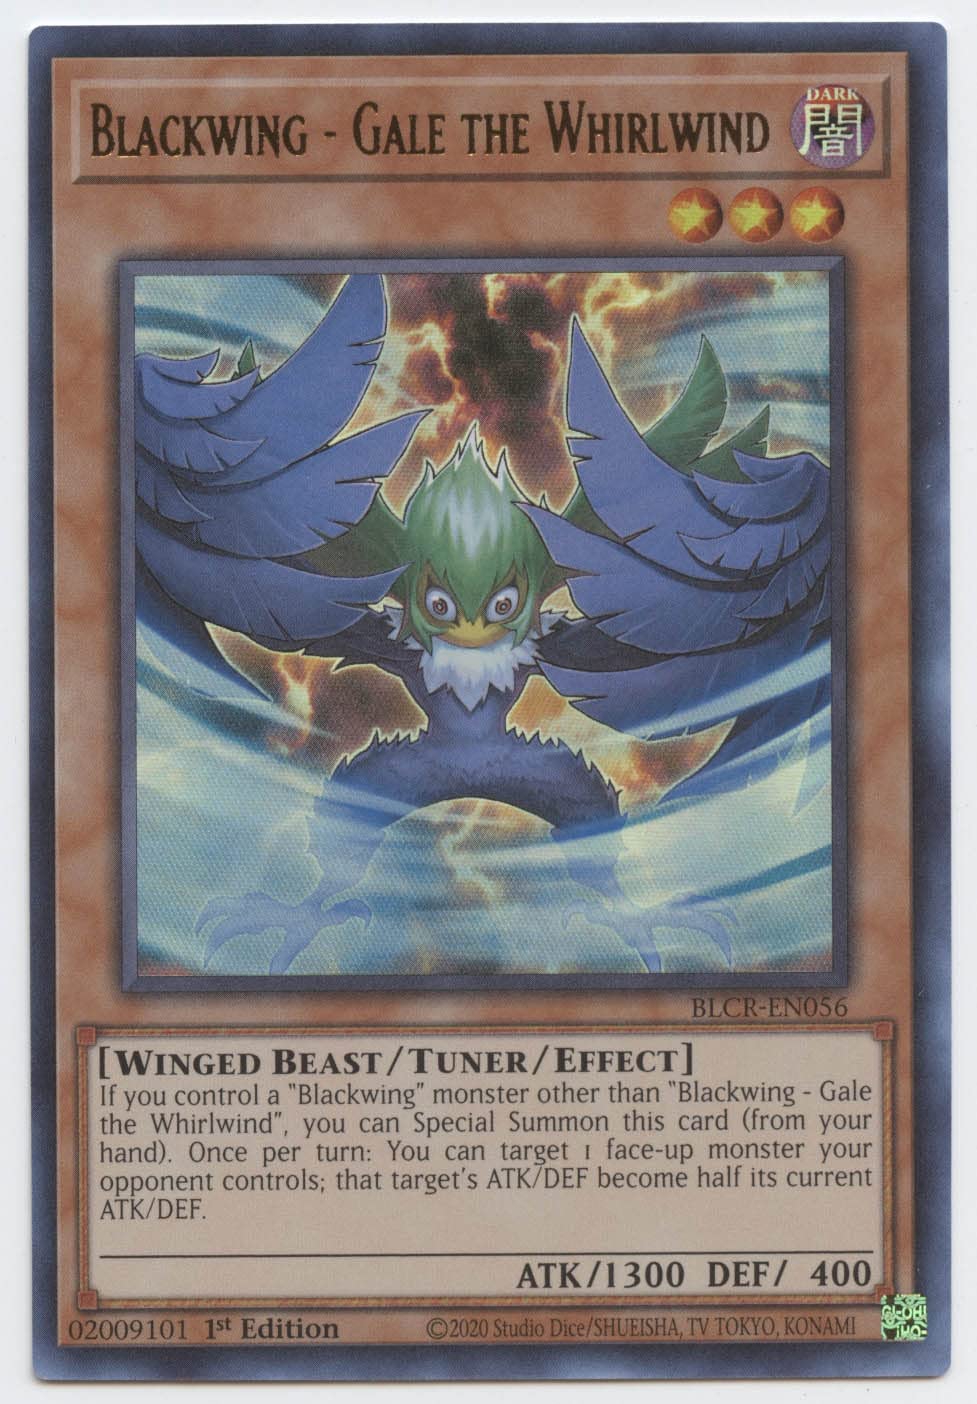 Blackwing - Gale The Whirlwind - BLCR-EN056 - Ultra Rare - 1st Edition